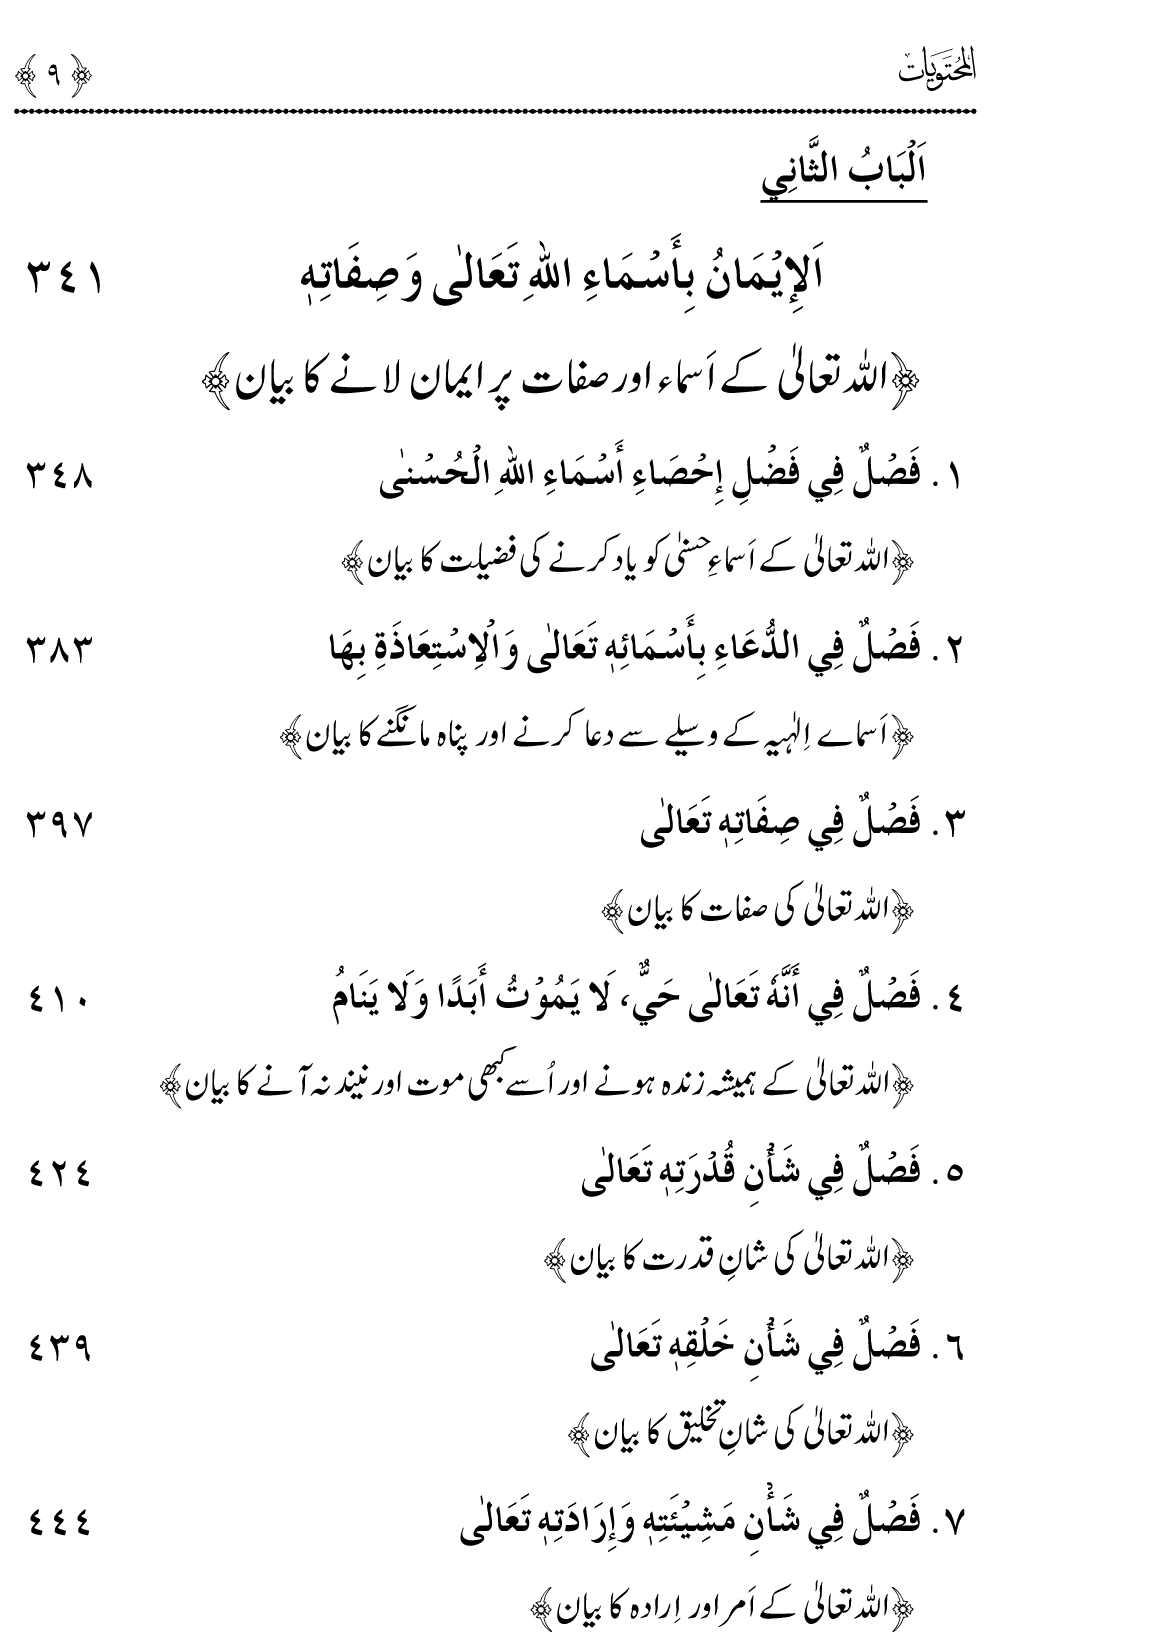 Ladders of Sunna for Deliverance from Deviation and Tribulations (Vol. 2)